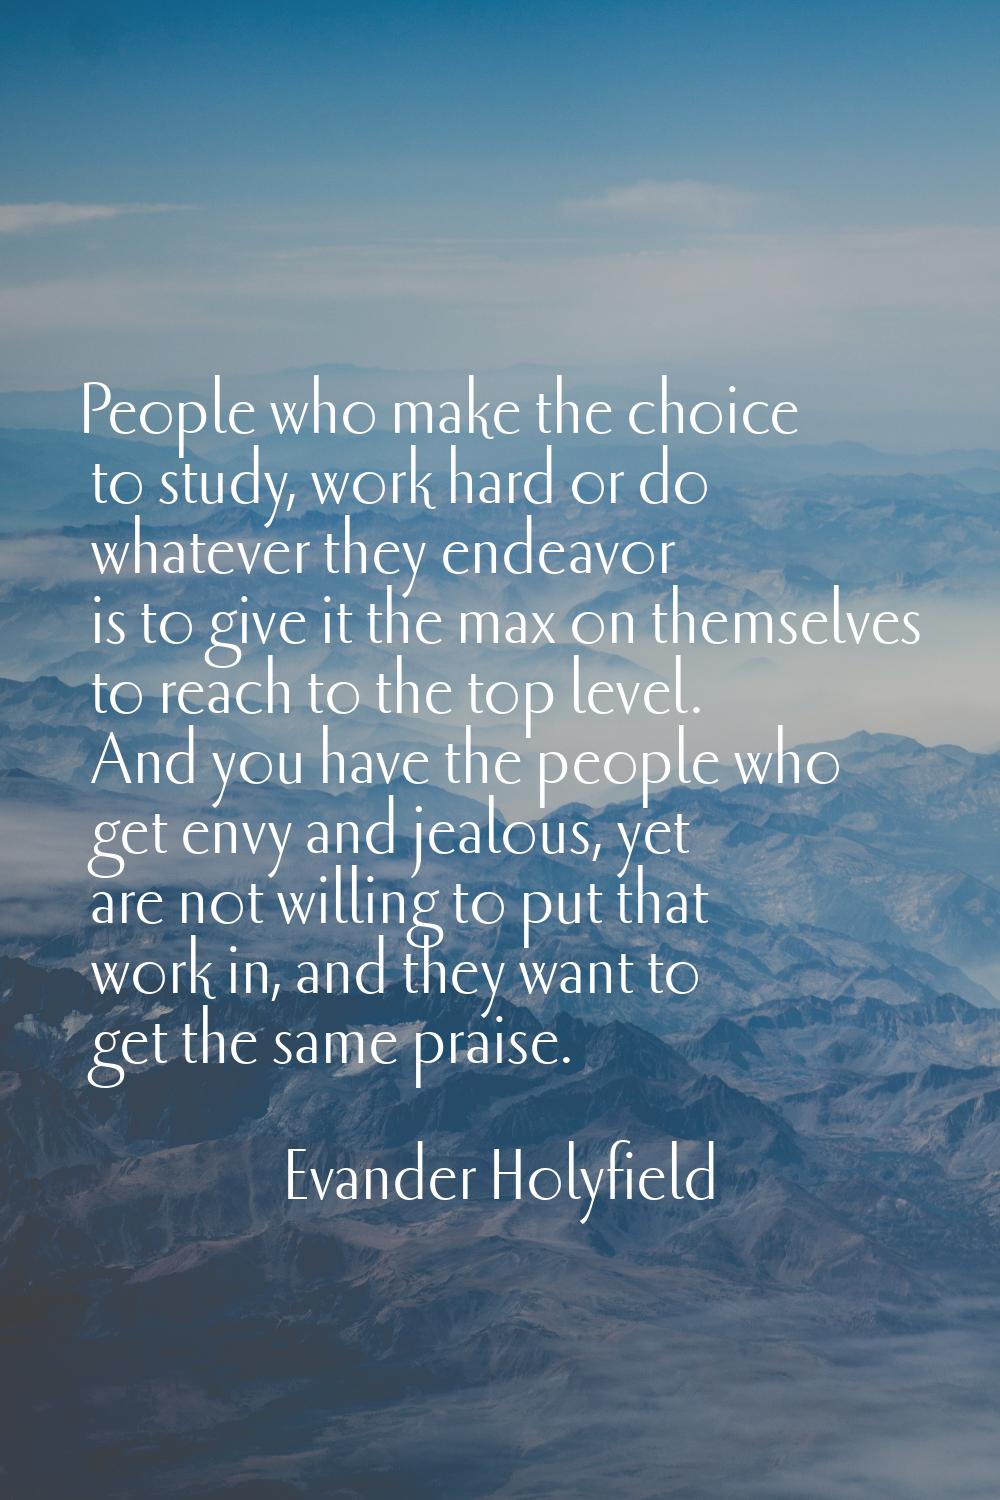 People who make the choice to study, work hard or do whatever they endeavor is to give it the max o